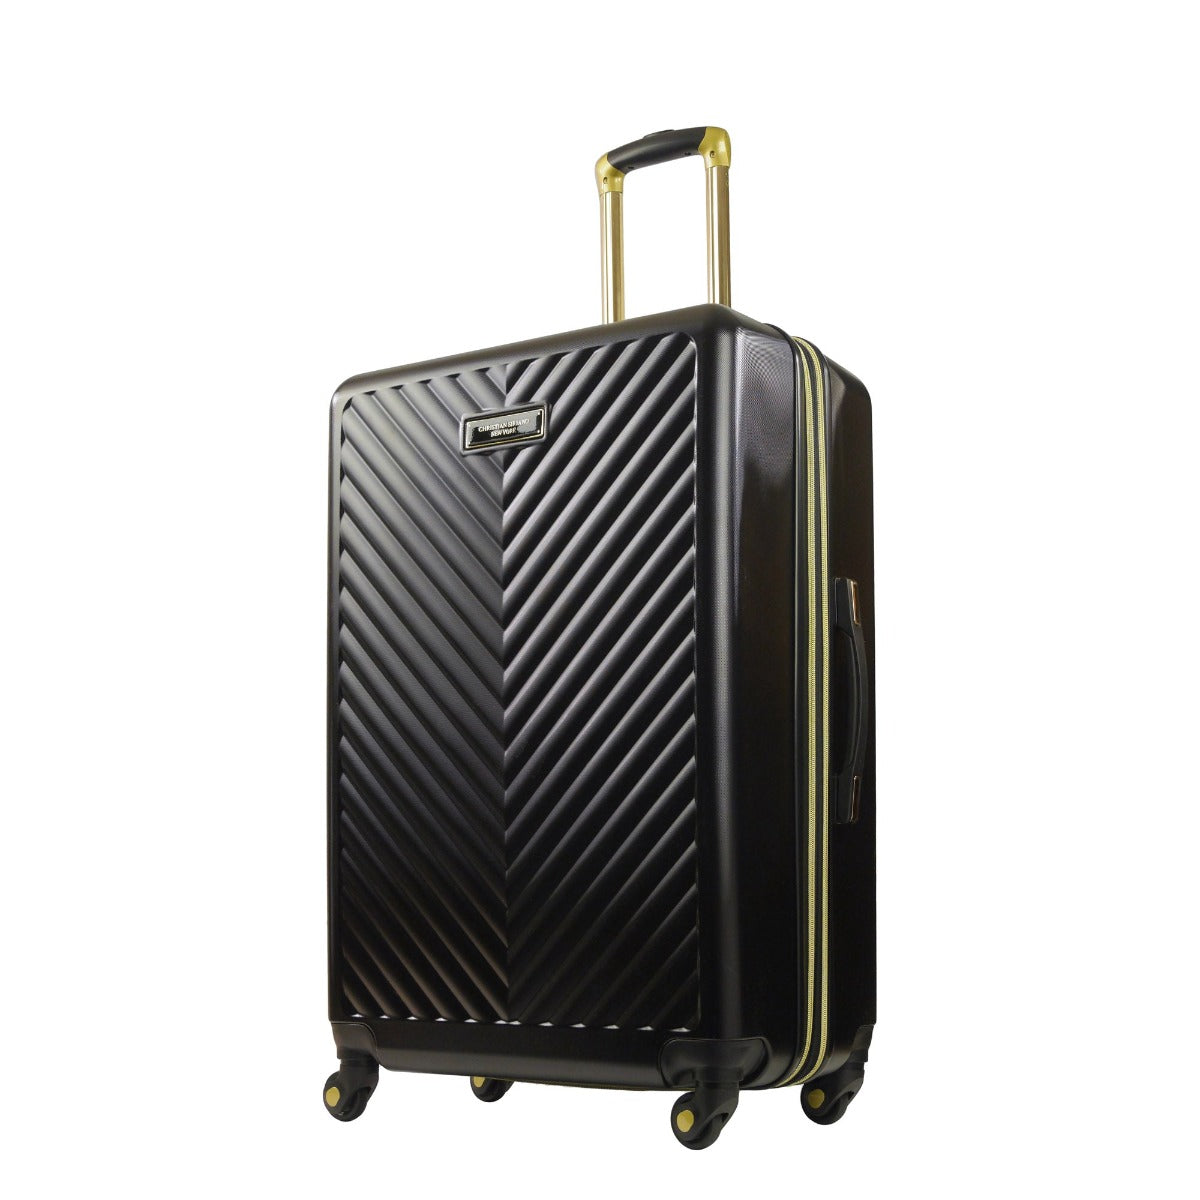 Christian Siriano Addie 29" checked luggage hardside spinner suitcase black - best suitcases for travelling 